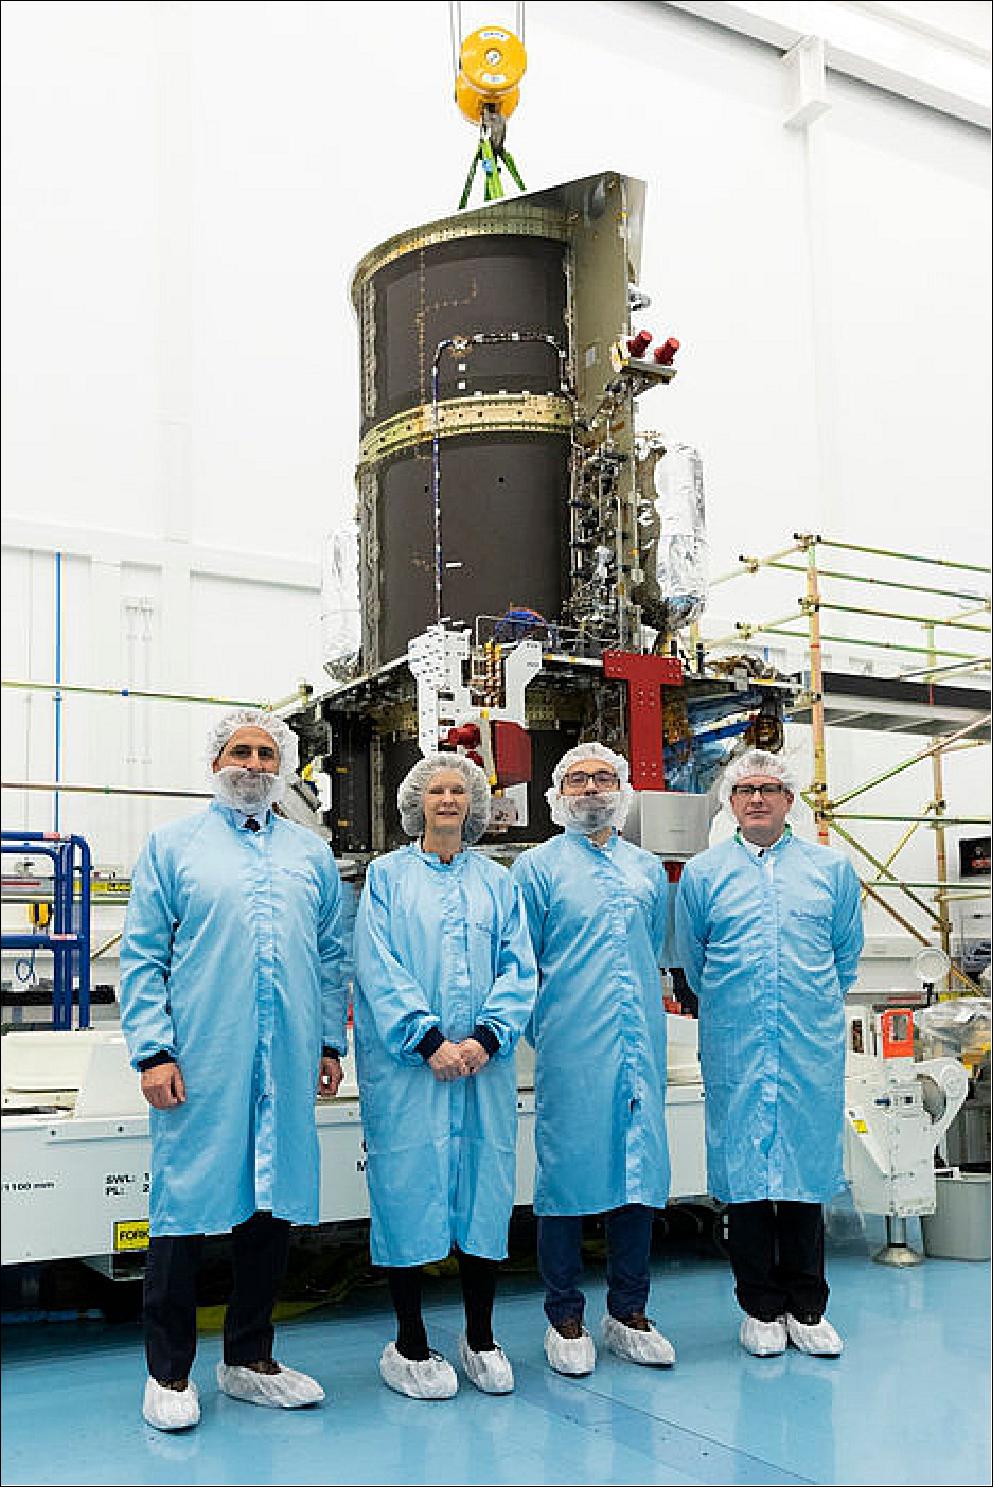 Figure 13: The partners for the Eutelsat Quantum mission are pictured. From left to right: Stéphane Lascar, ESA Head of the Telecommunications Satellite Program's Department, Sarah Parker, SSTL Managing Director, Yohann Leroy, Eutelsat Deputy CEO and Chief Technical Officer, and David Phillips, Airbus UK Head of UK Program (image credit: SSTL)